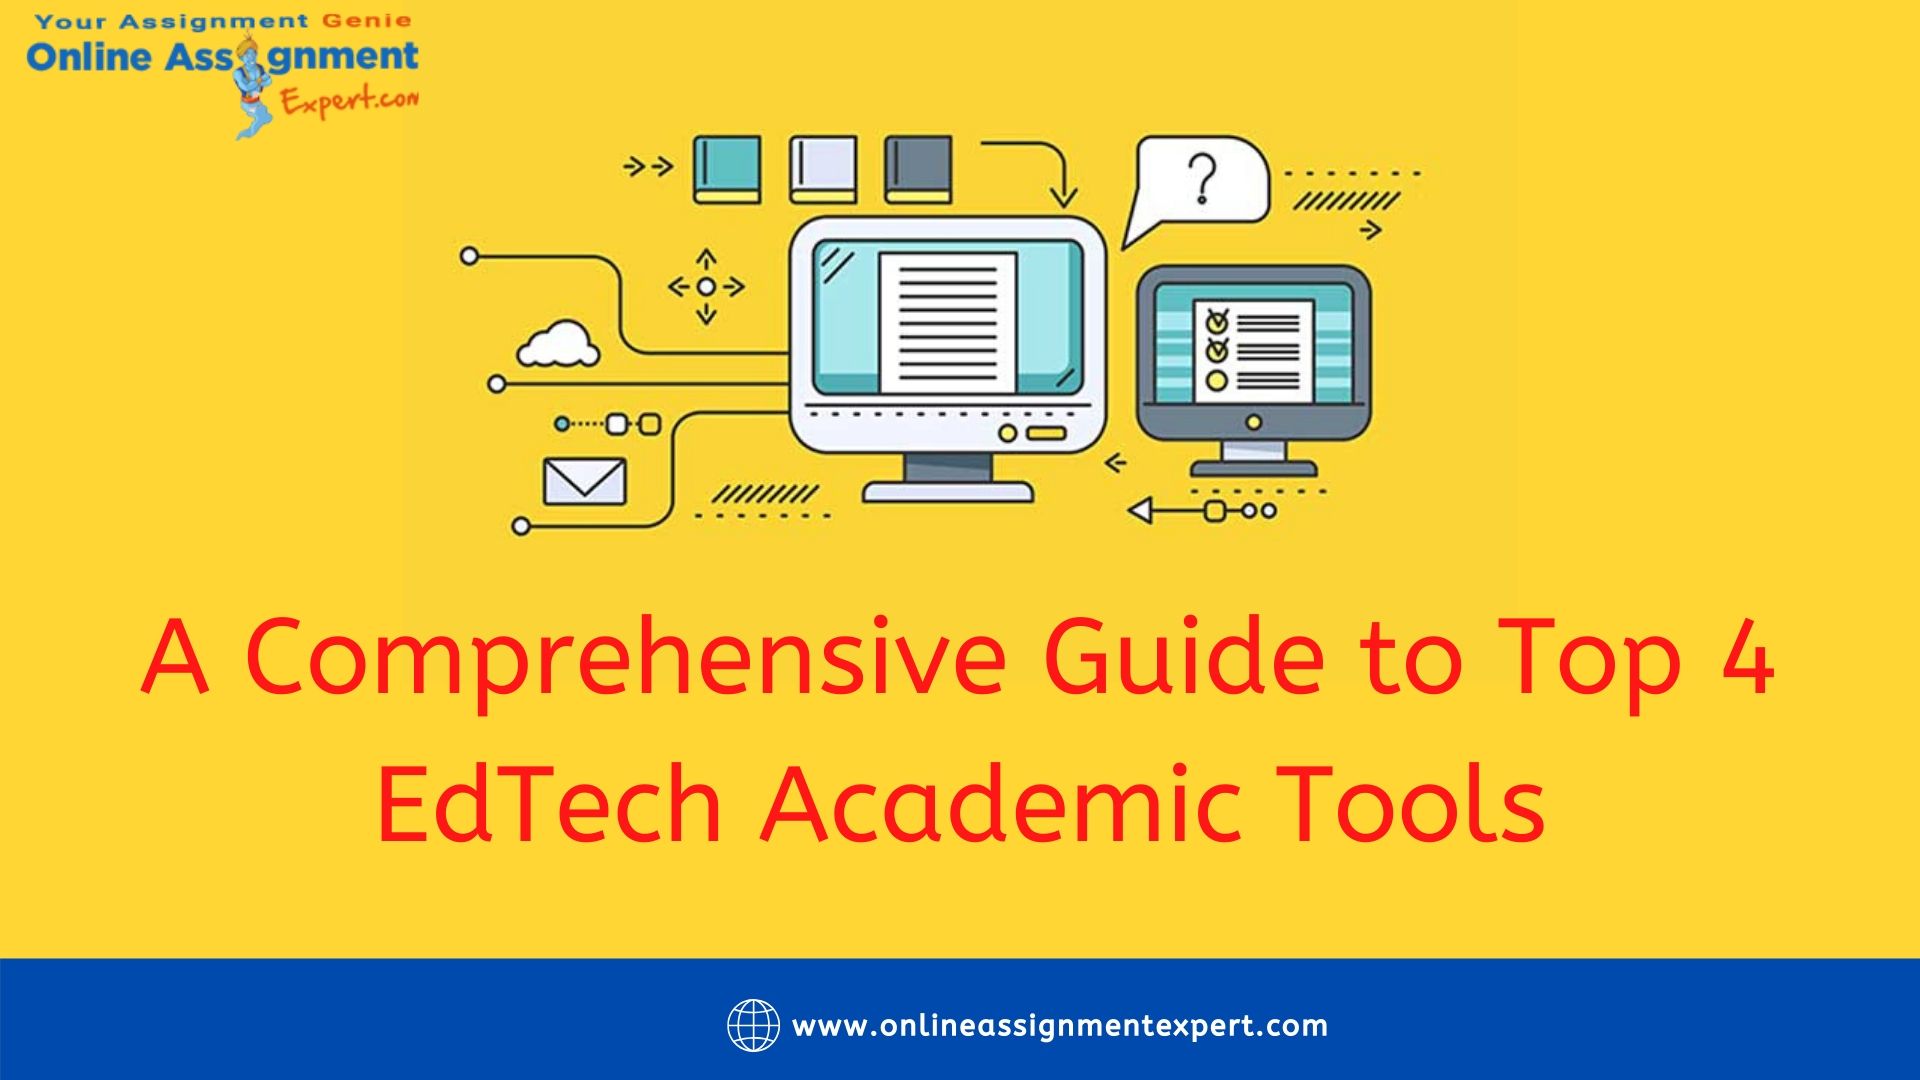 A Comprehensive Guide to Top 4 EdTech Academic Tools